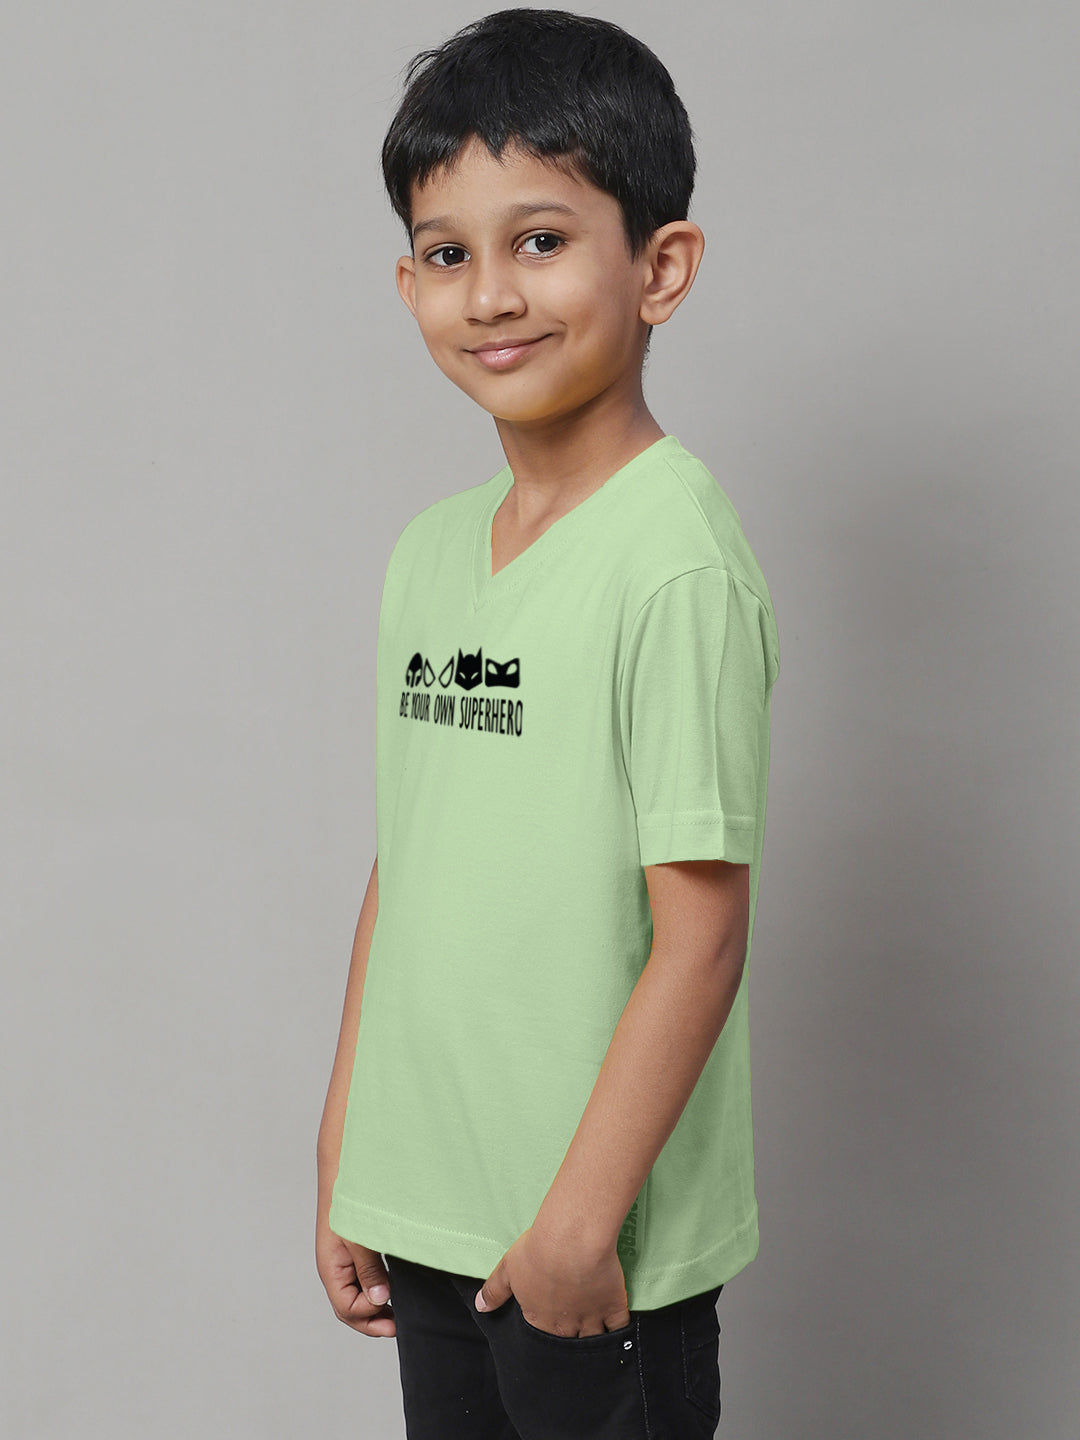 Boys Be Your Own Superhero Half Sleeves Printed T-Shirt - Friskers